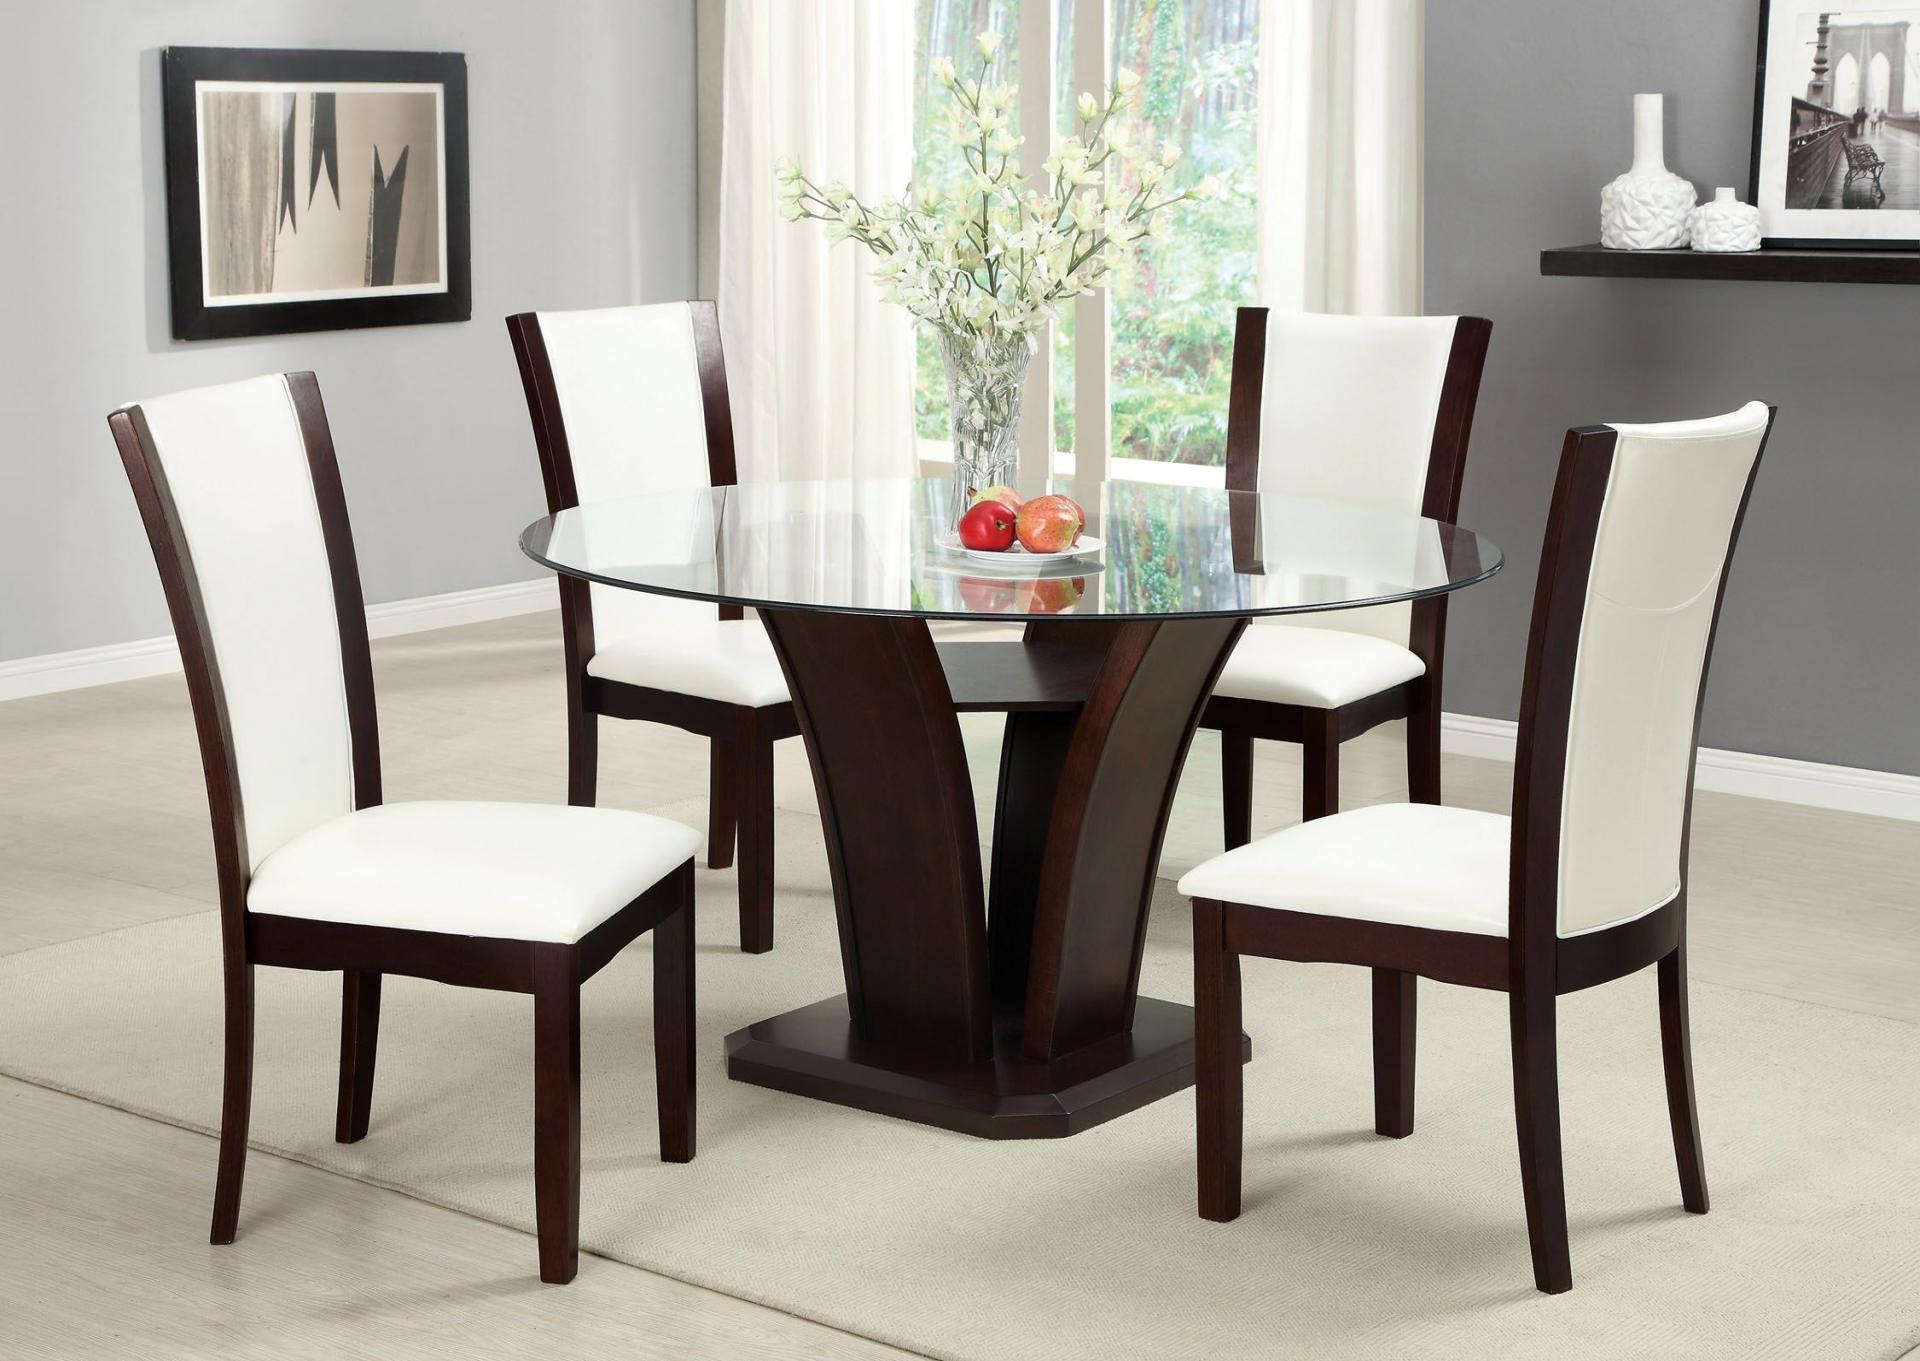 Mainline Round table and four chairs/ two color options,Store Brand